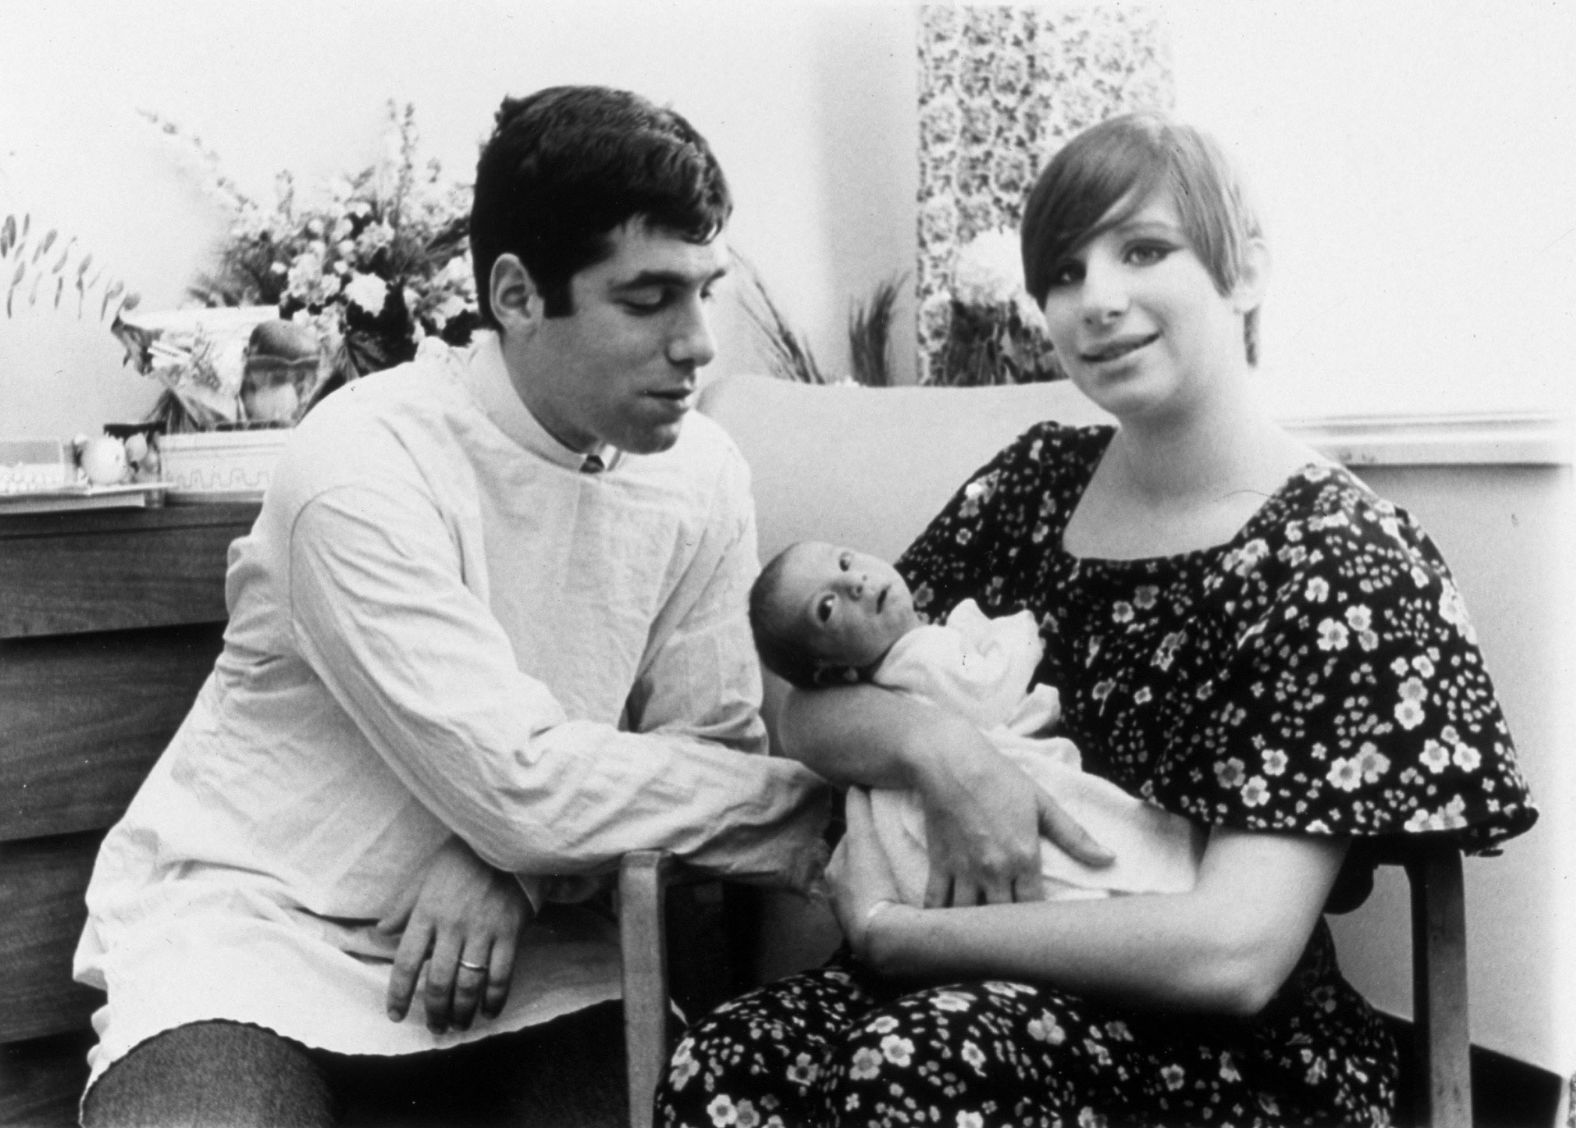 Gould and Streisand's son, Jason, was born in 1966.